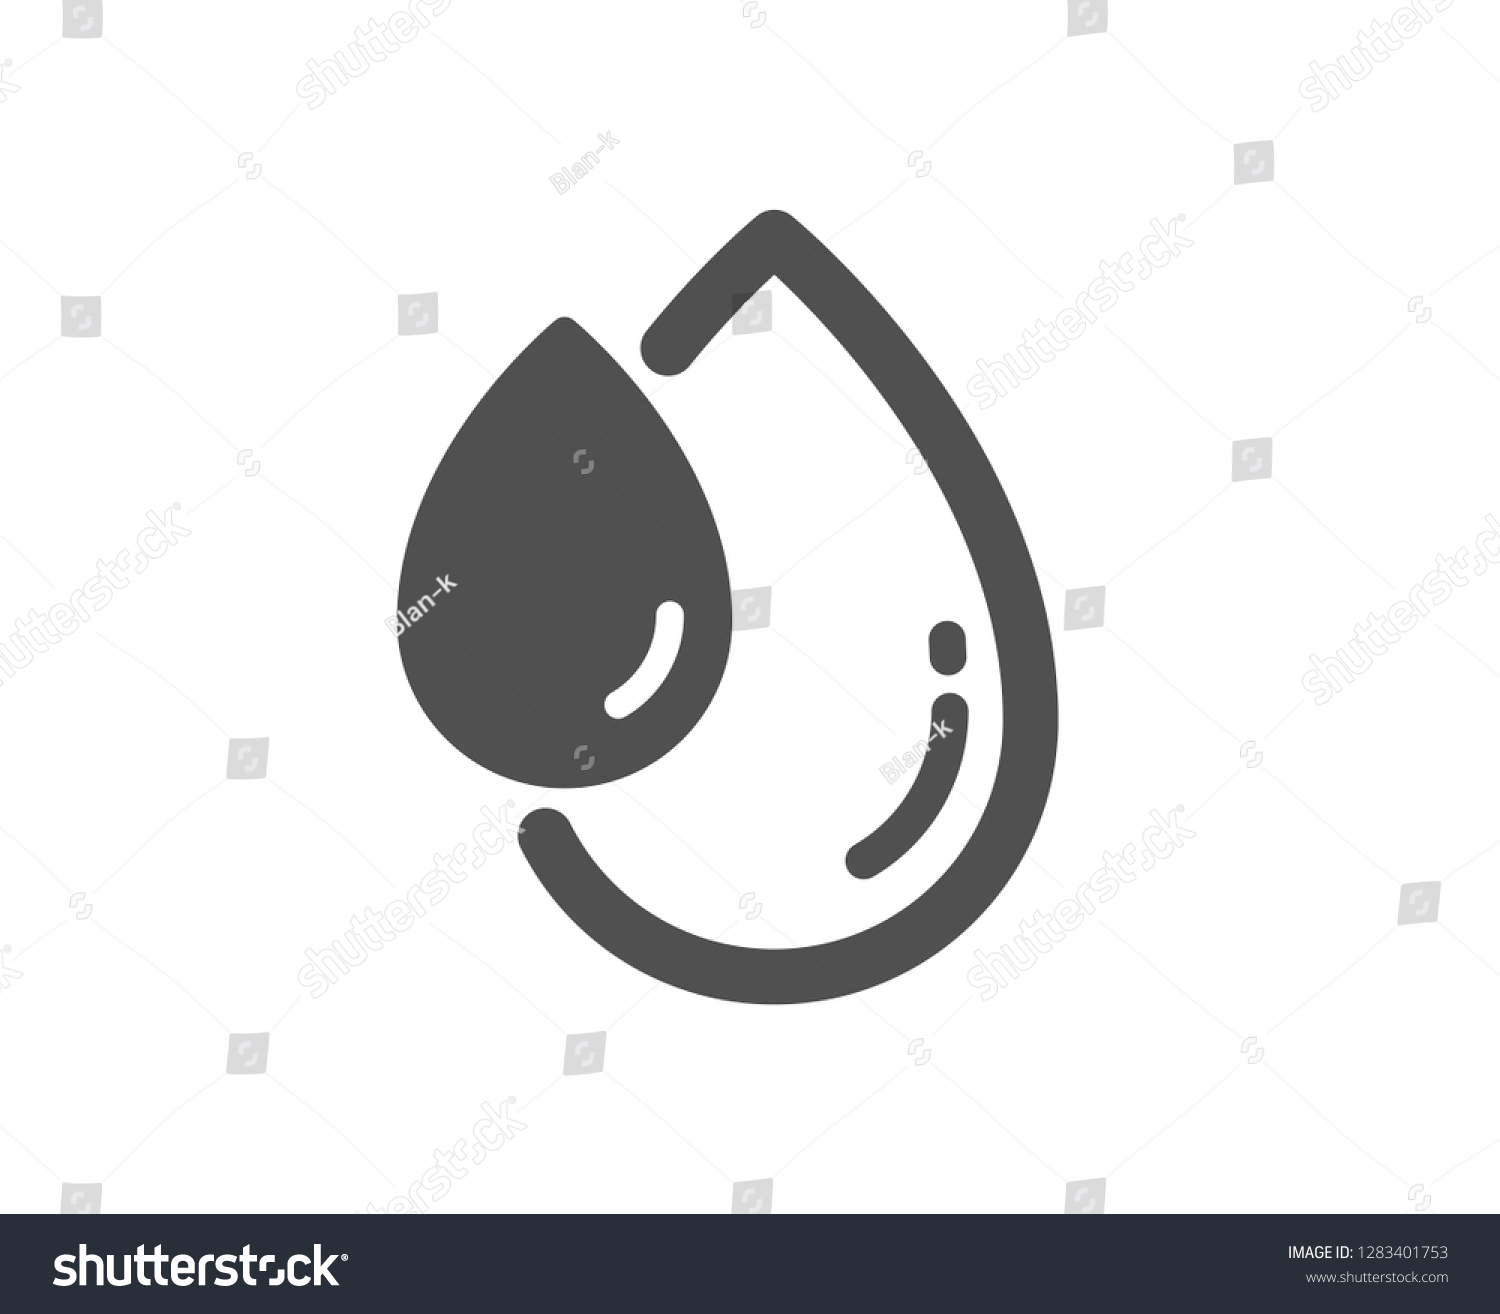 Oil drop icon. Hair care serum sign. Quality design element. Classic style icon. Vector #1283401753